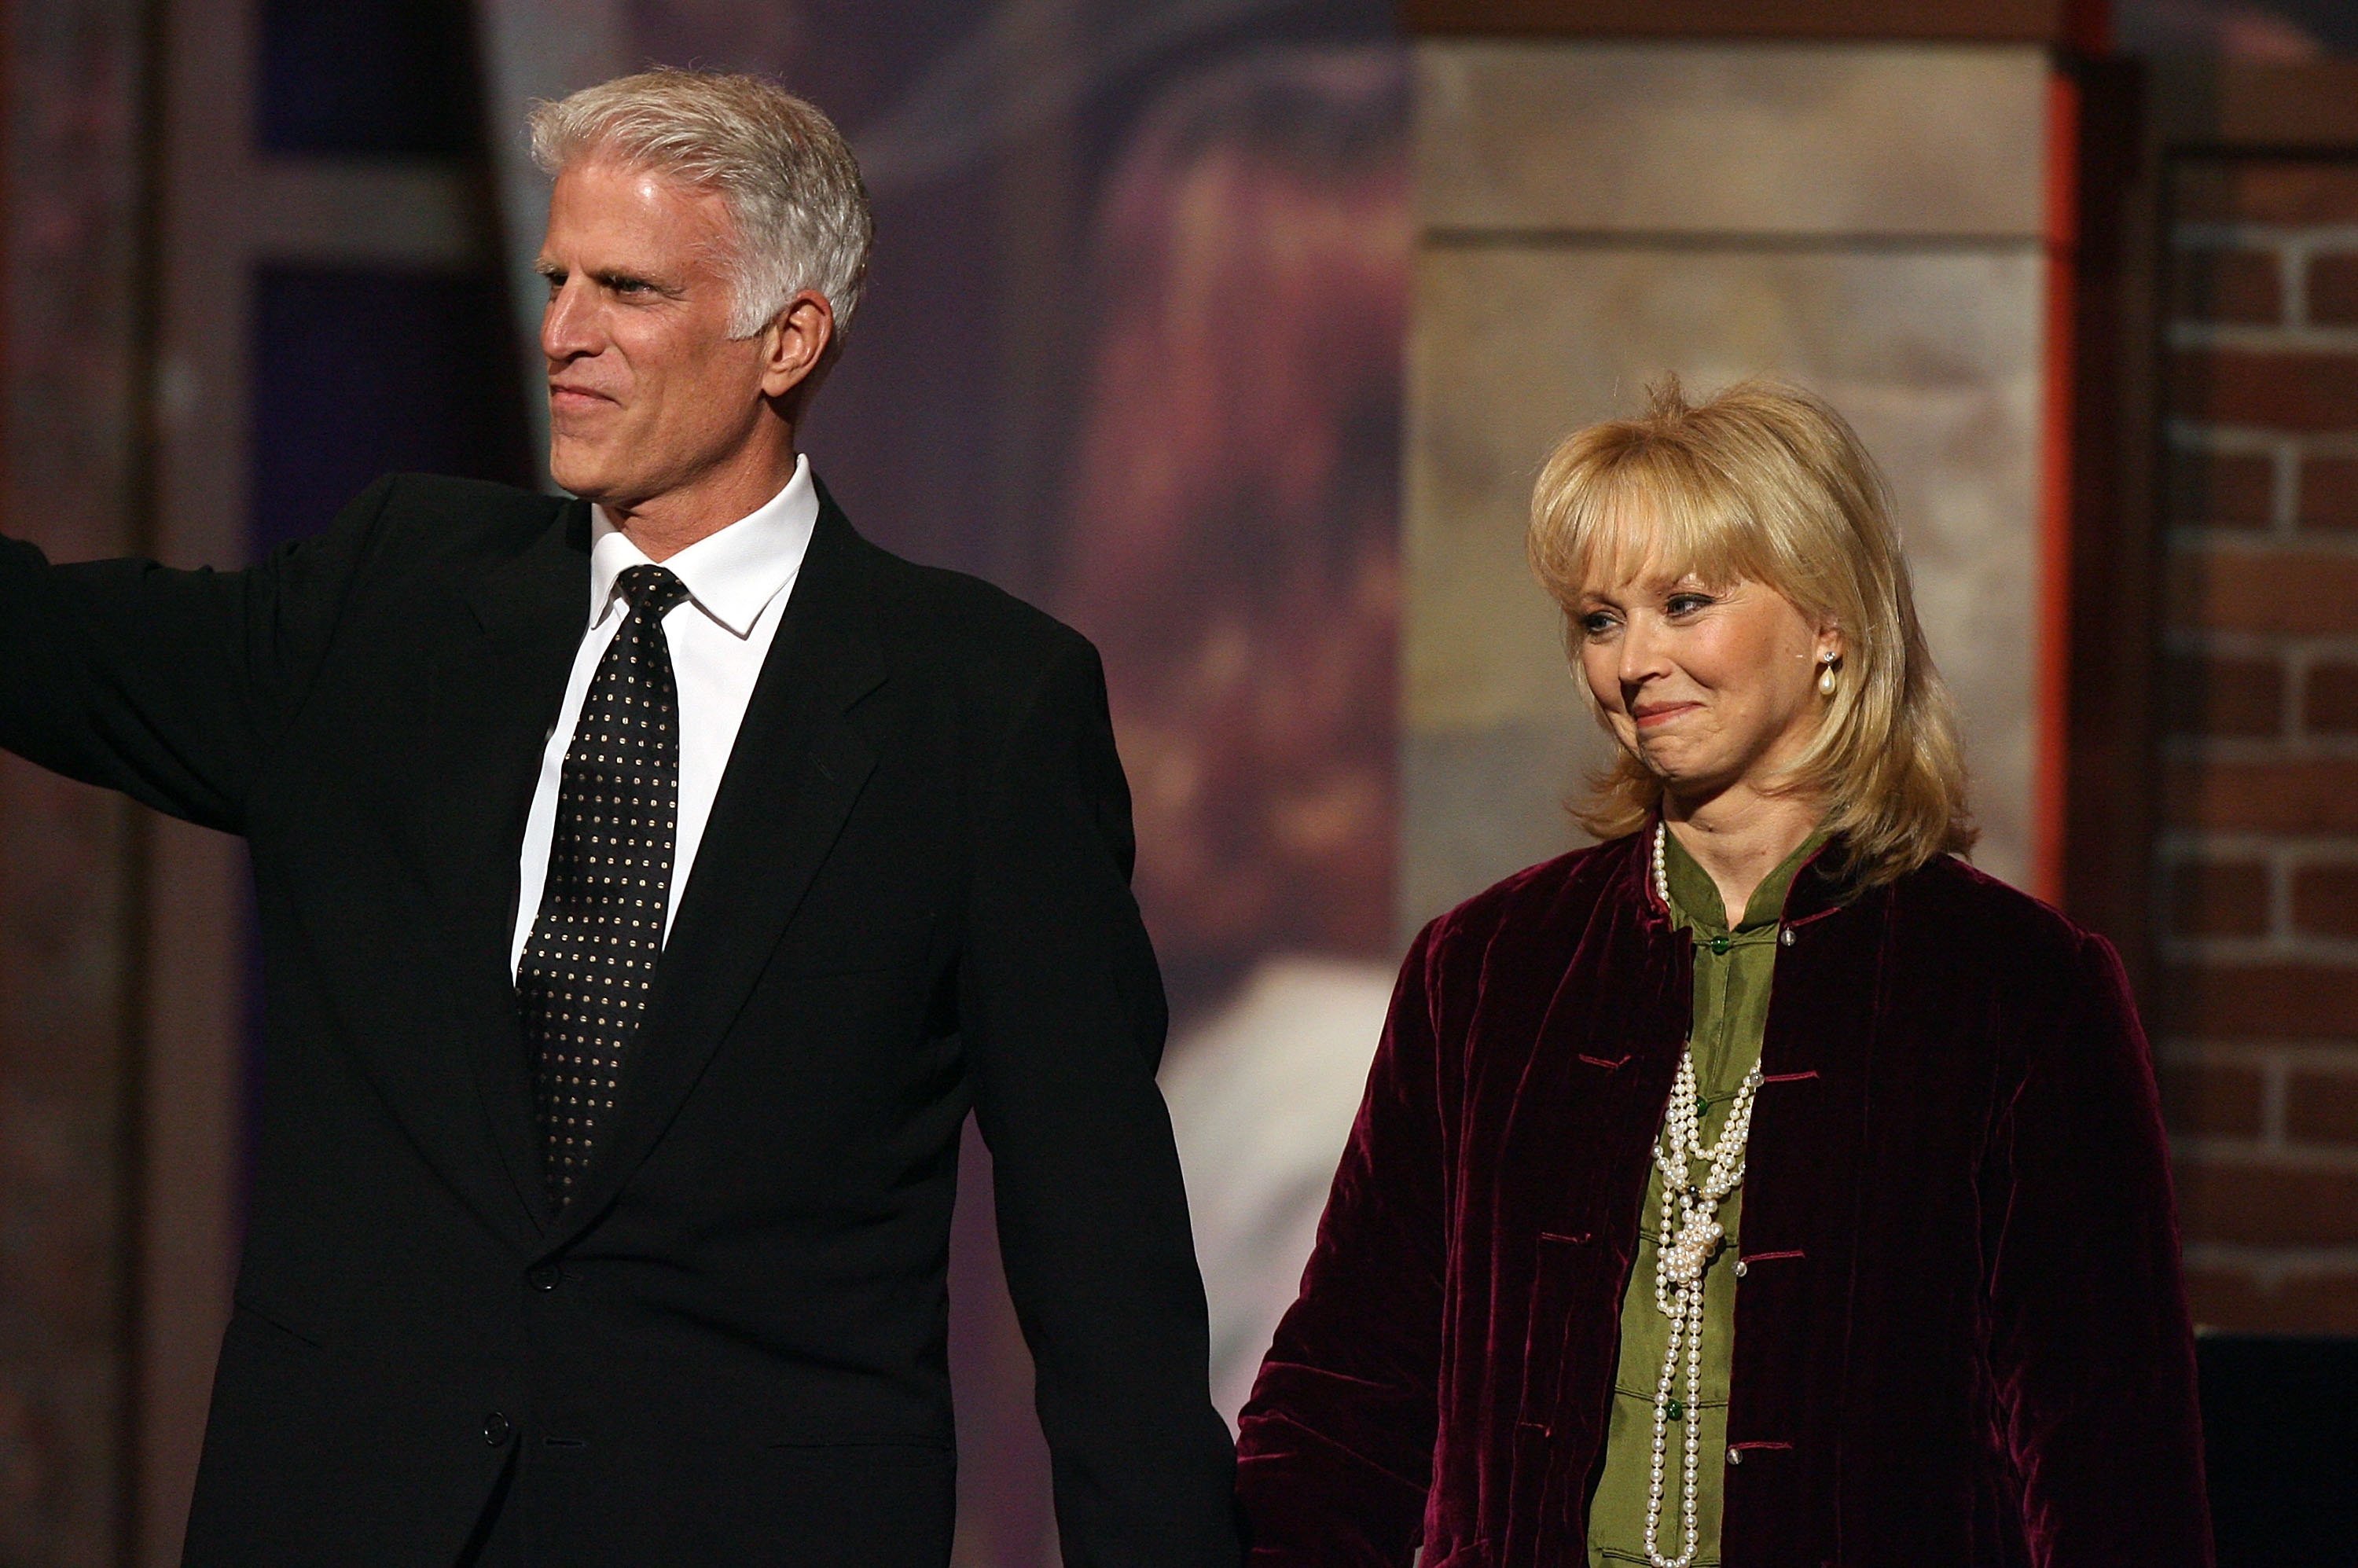 Ted Danson and Shelley Long at the Barker Hangar on March 19, 2006 | Photo: Getty Images